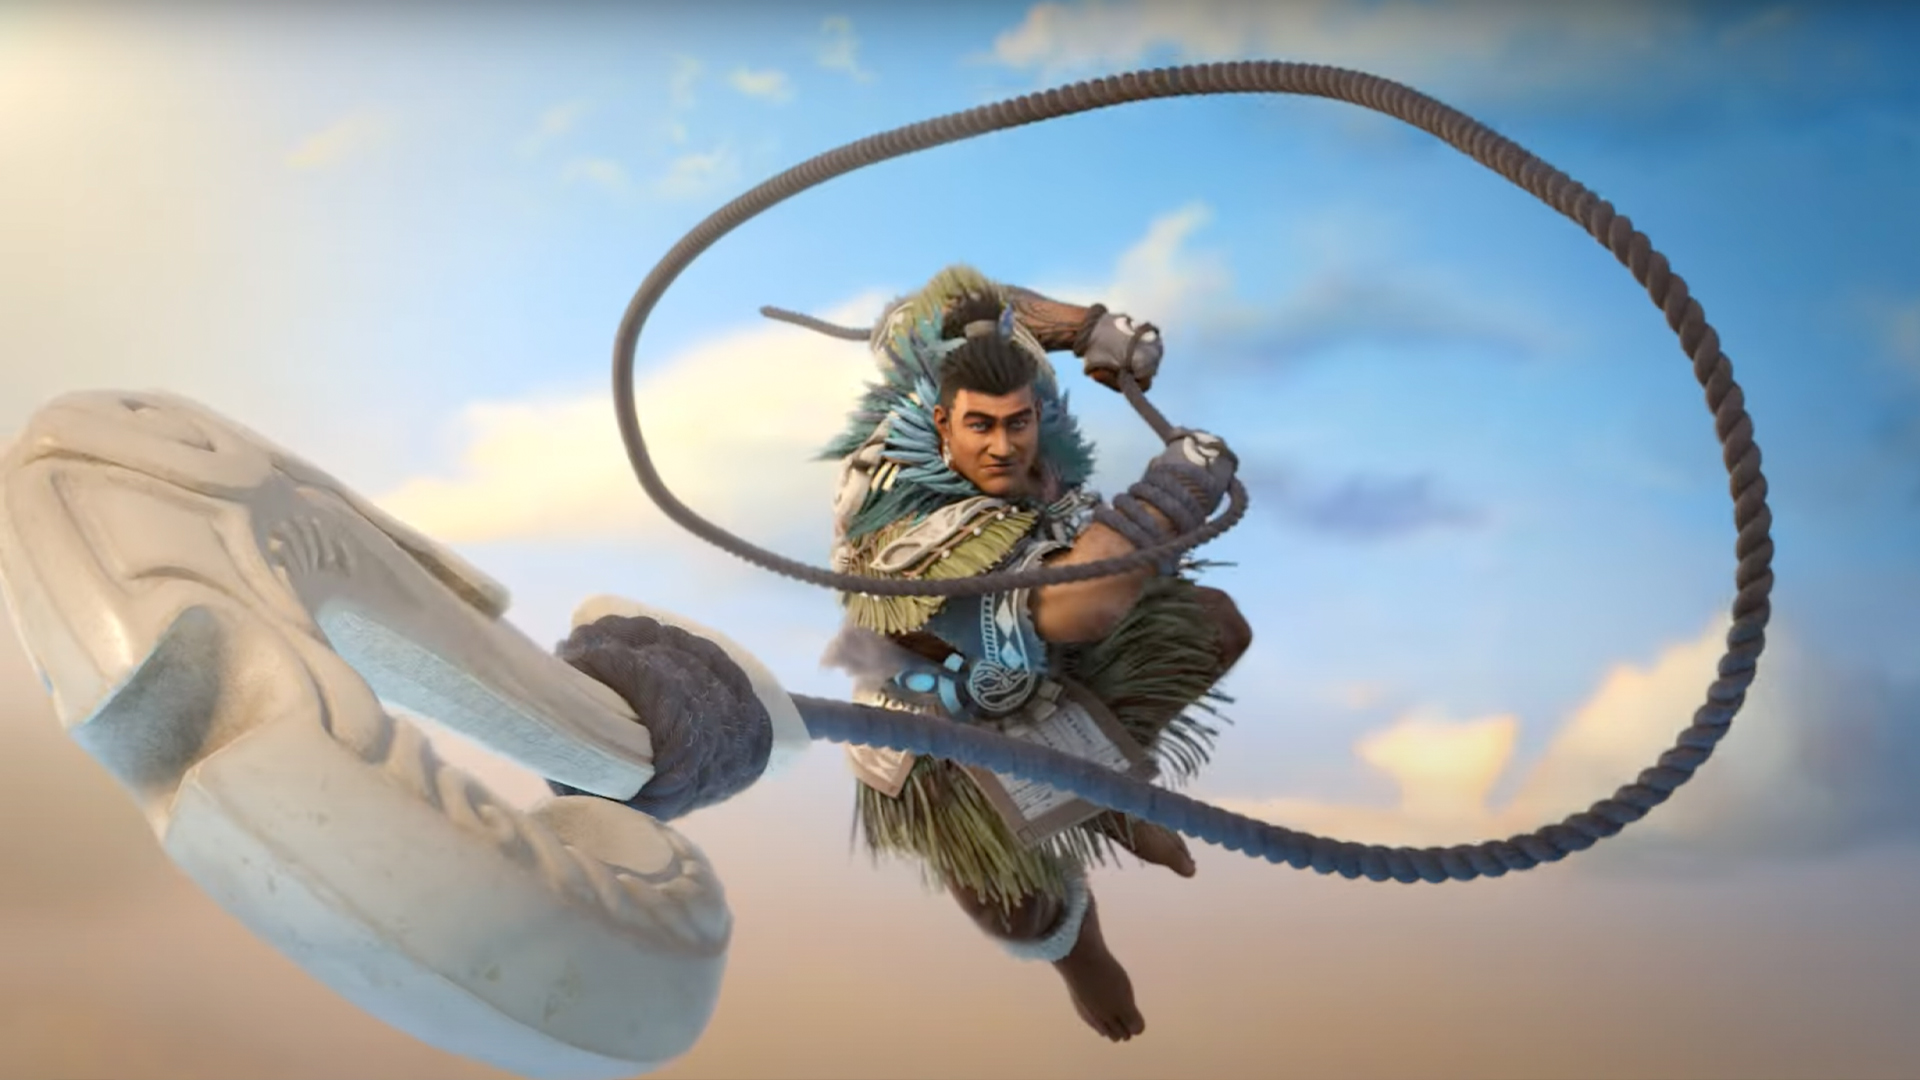 Newest Smite god is Maui, complete with his legendary fish hook